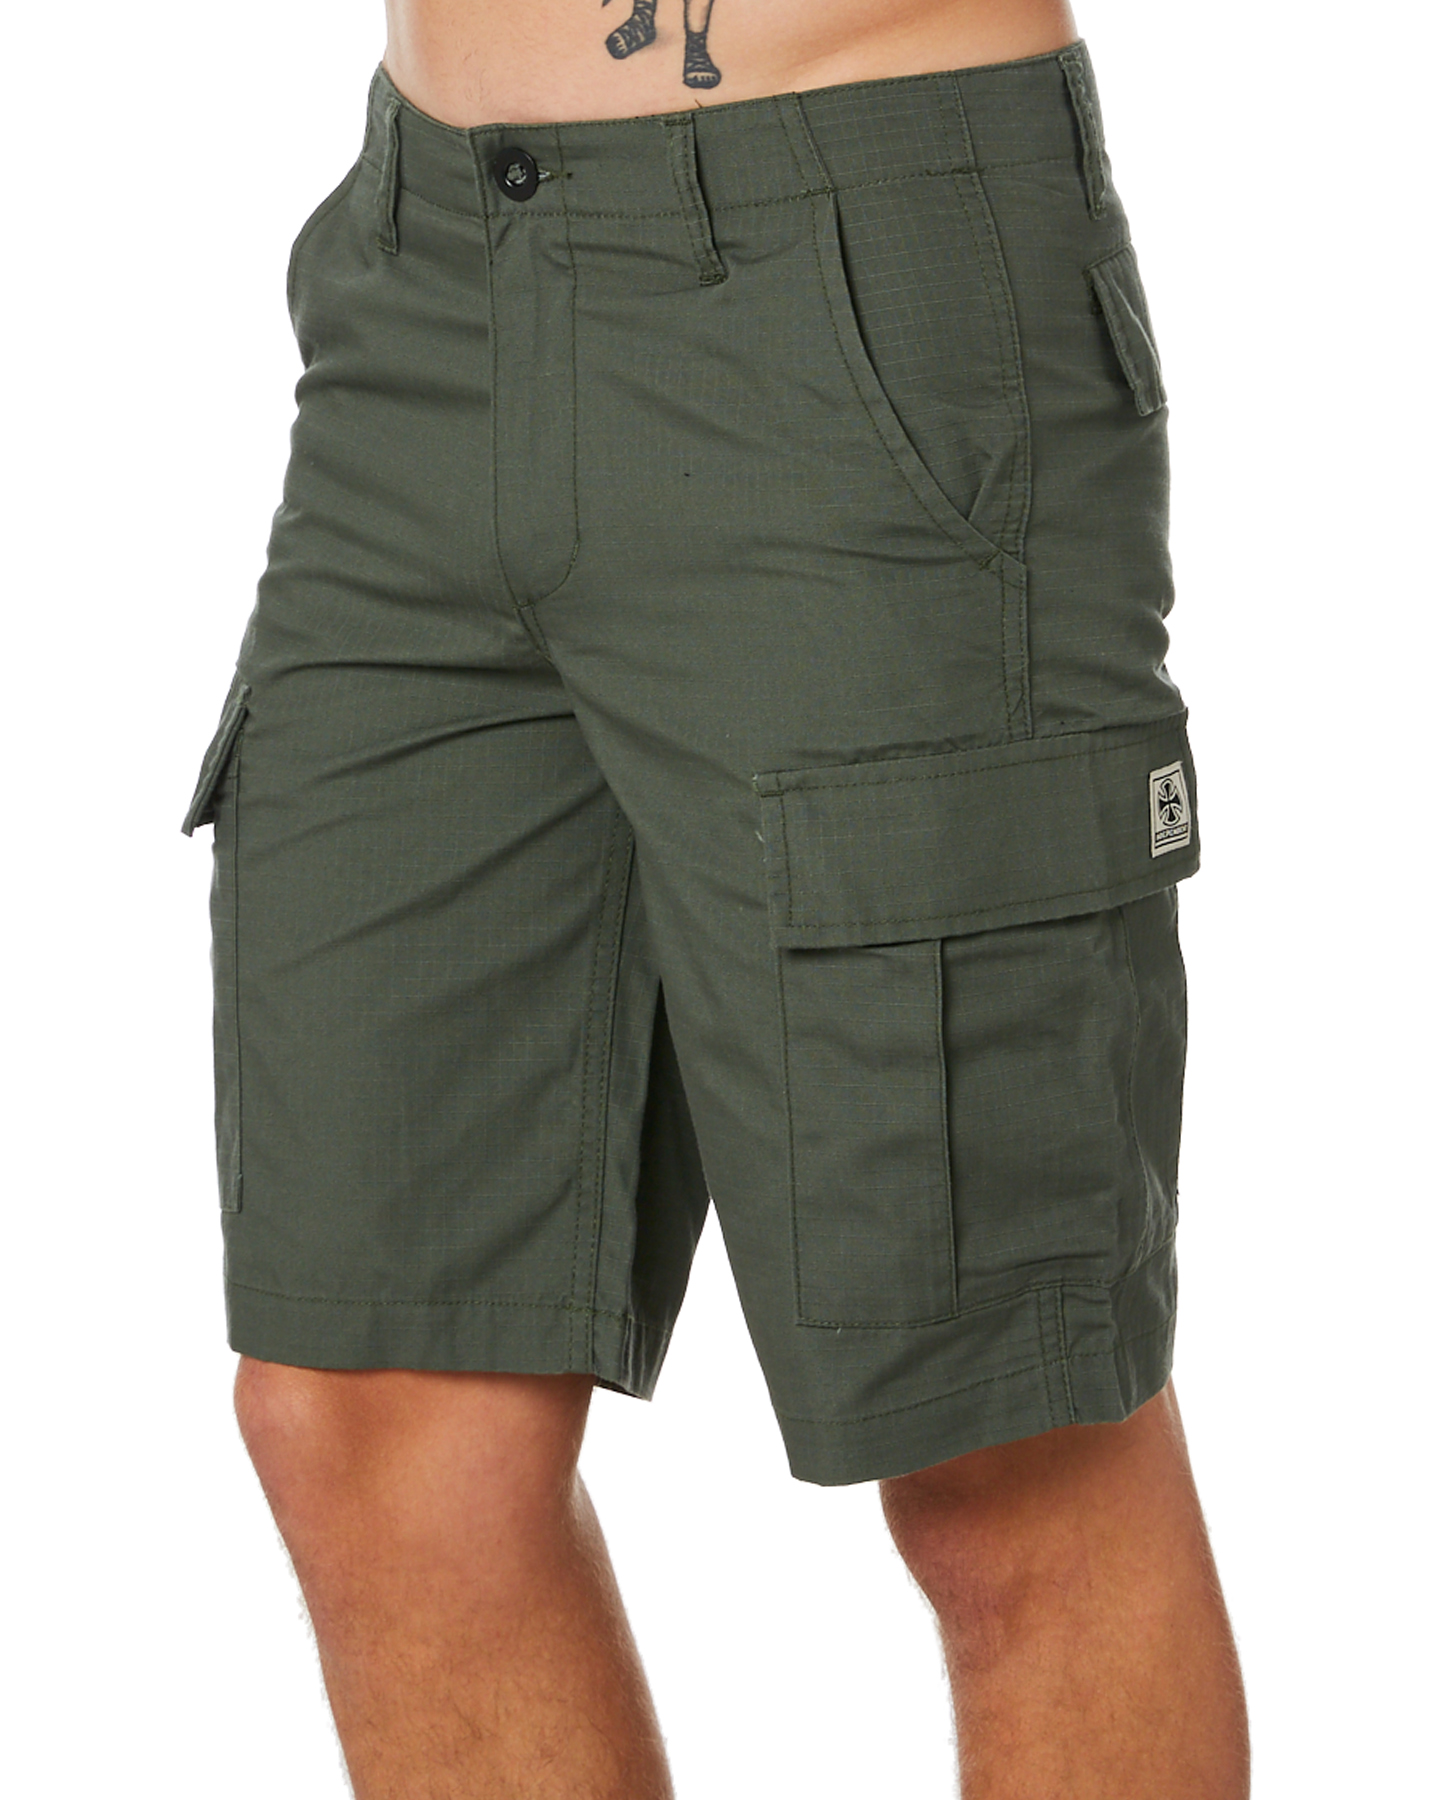 Independent No Bs Ripstop Mens Cargo Short - Jungle | SurfStitch